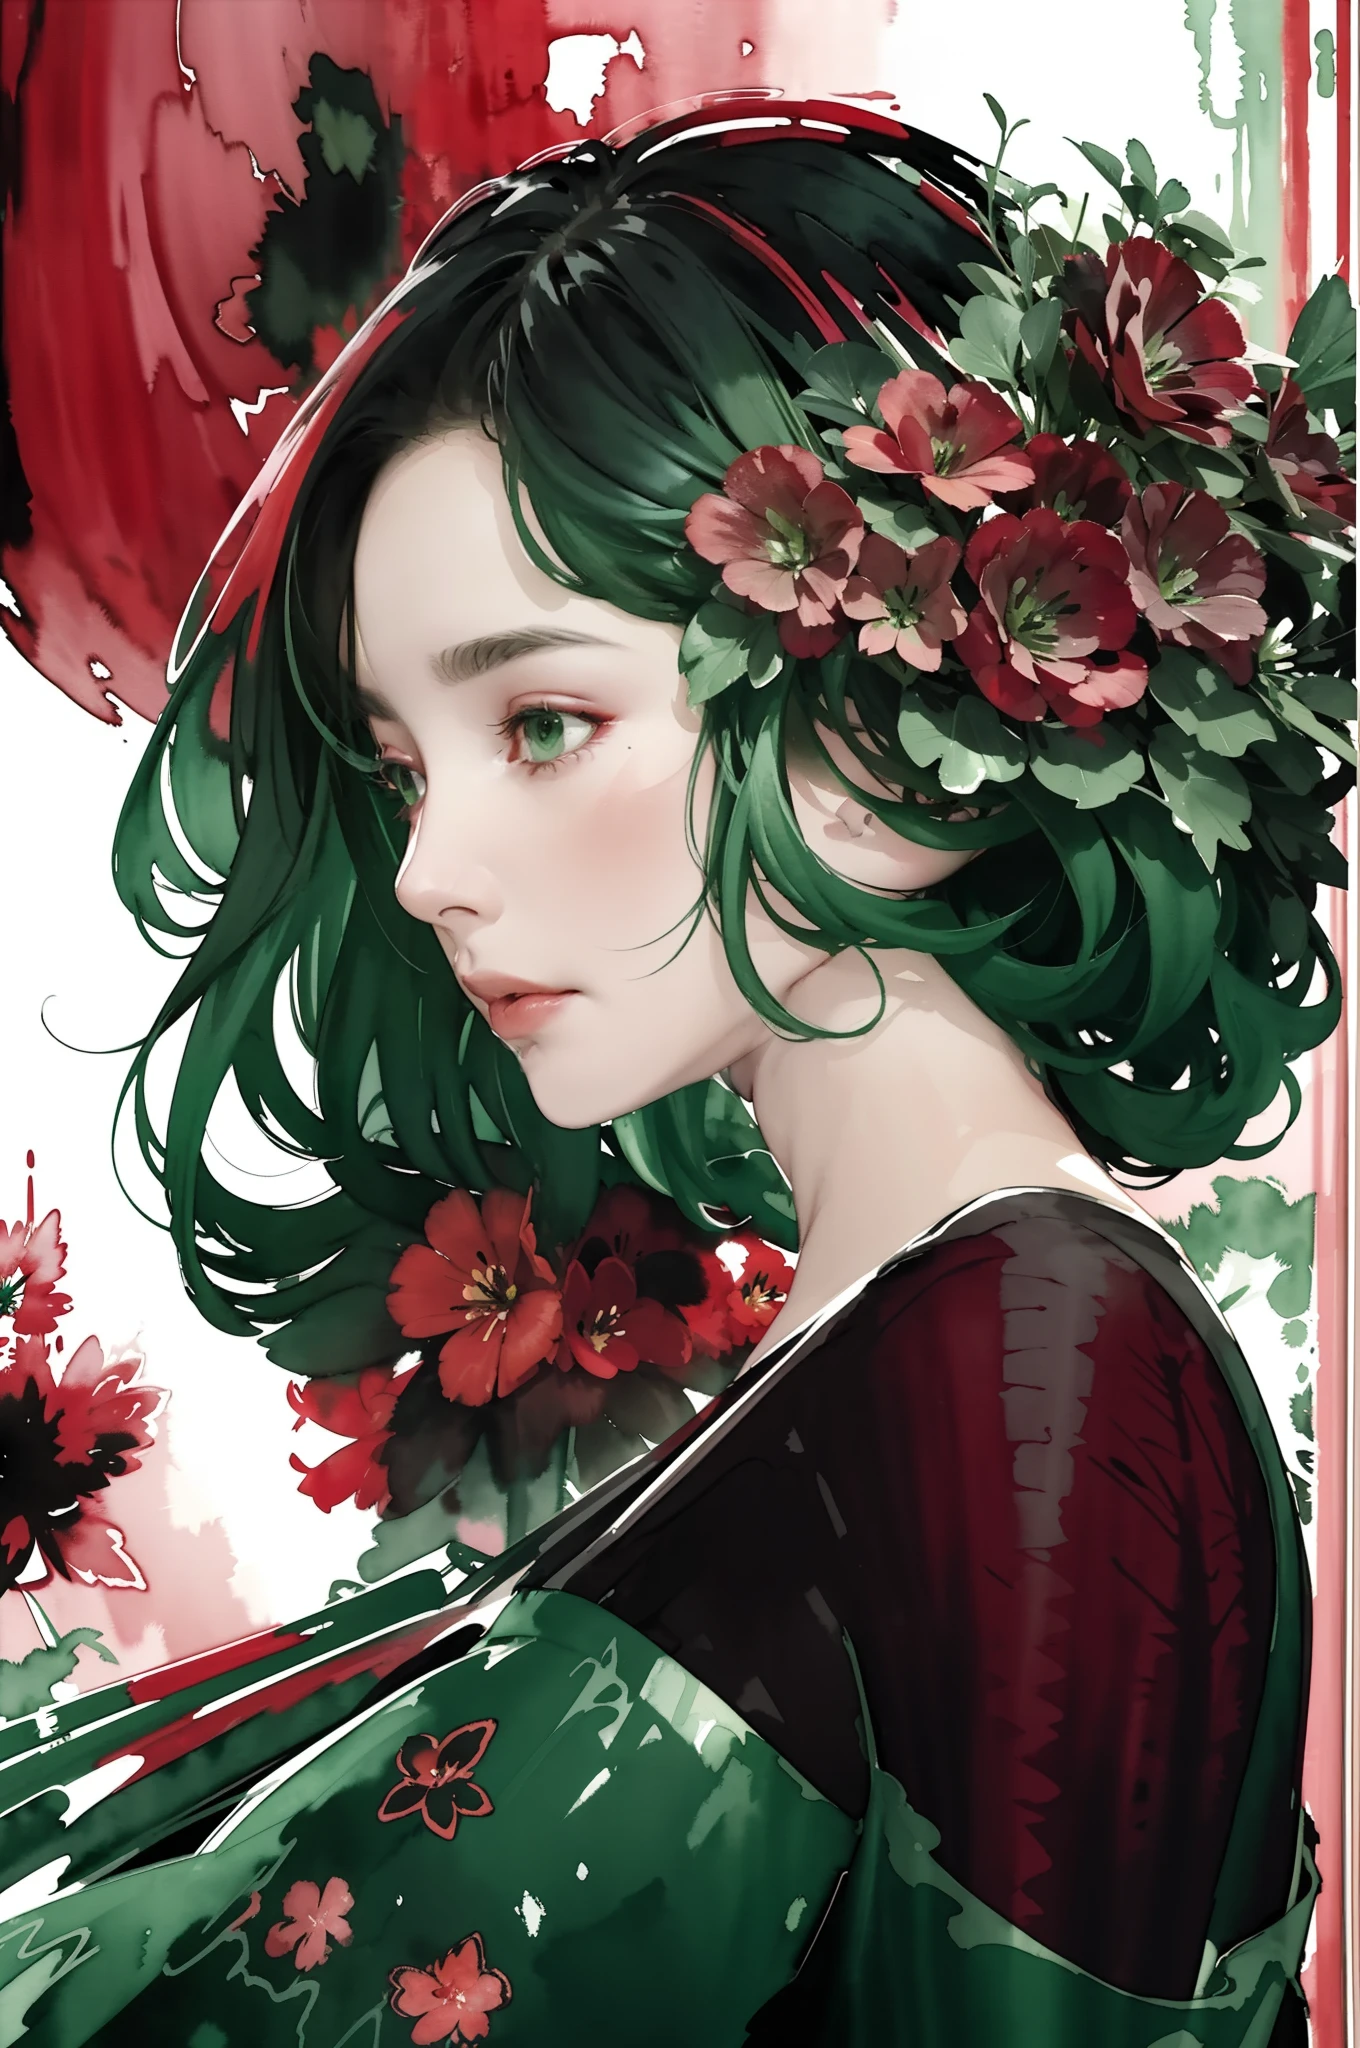 1girl, red and black flowers, Lisianthus ,in the style of black, light red and light green, dreamy and romantic compositions, pale pink, ethereal foliage, playful arrangements,fantasy, high contrast, ink strokes, explosions, over exposure, light and green tone impression , abstract, ((watercolor painting by John Berkey and Jeremy Mann )) brush strokes, negative space